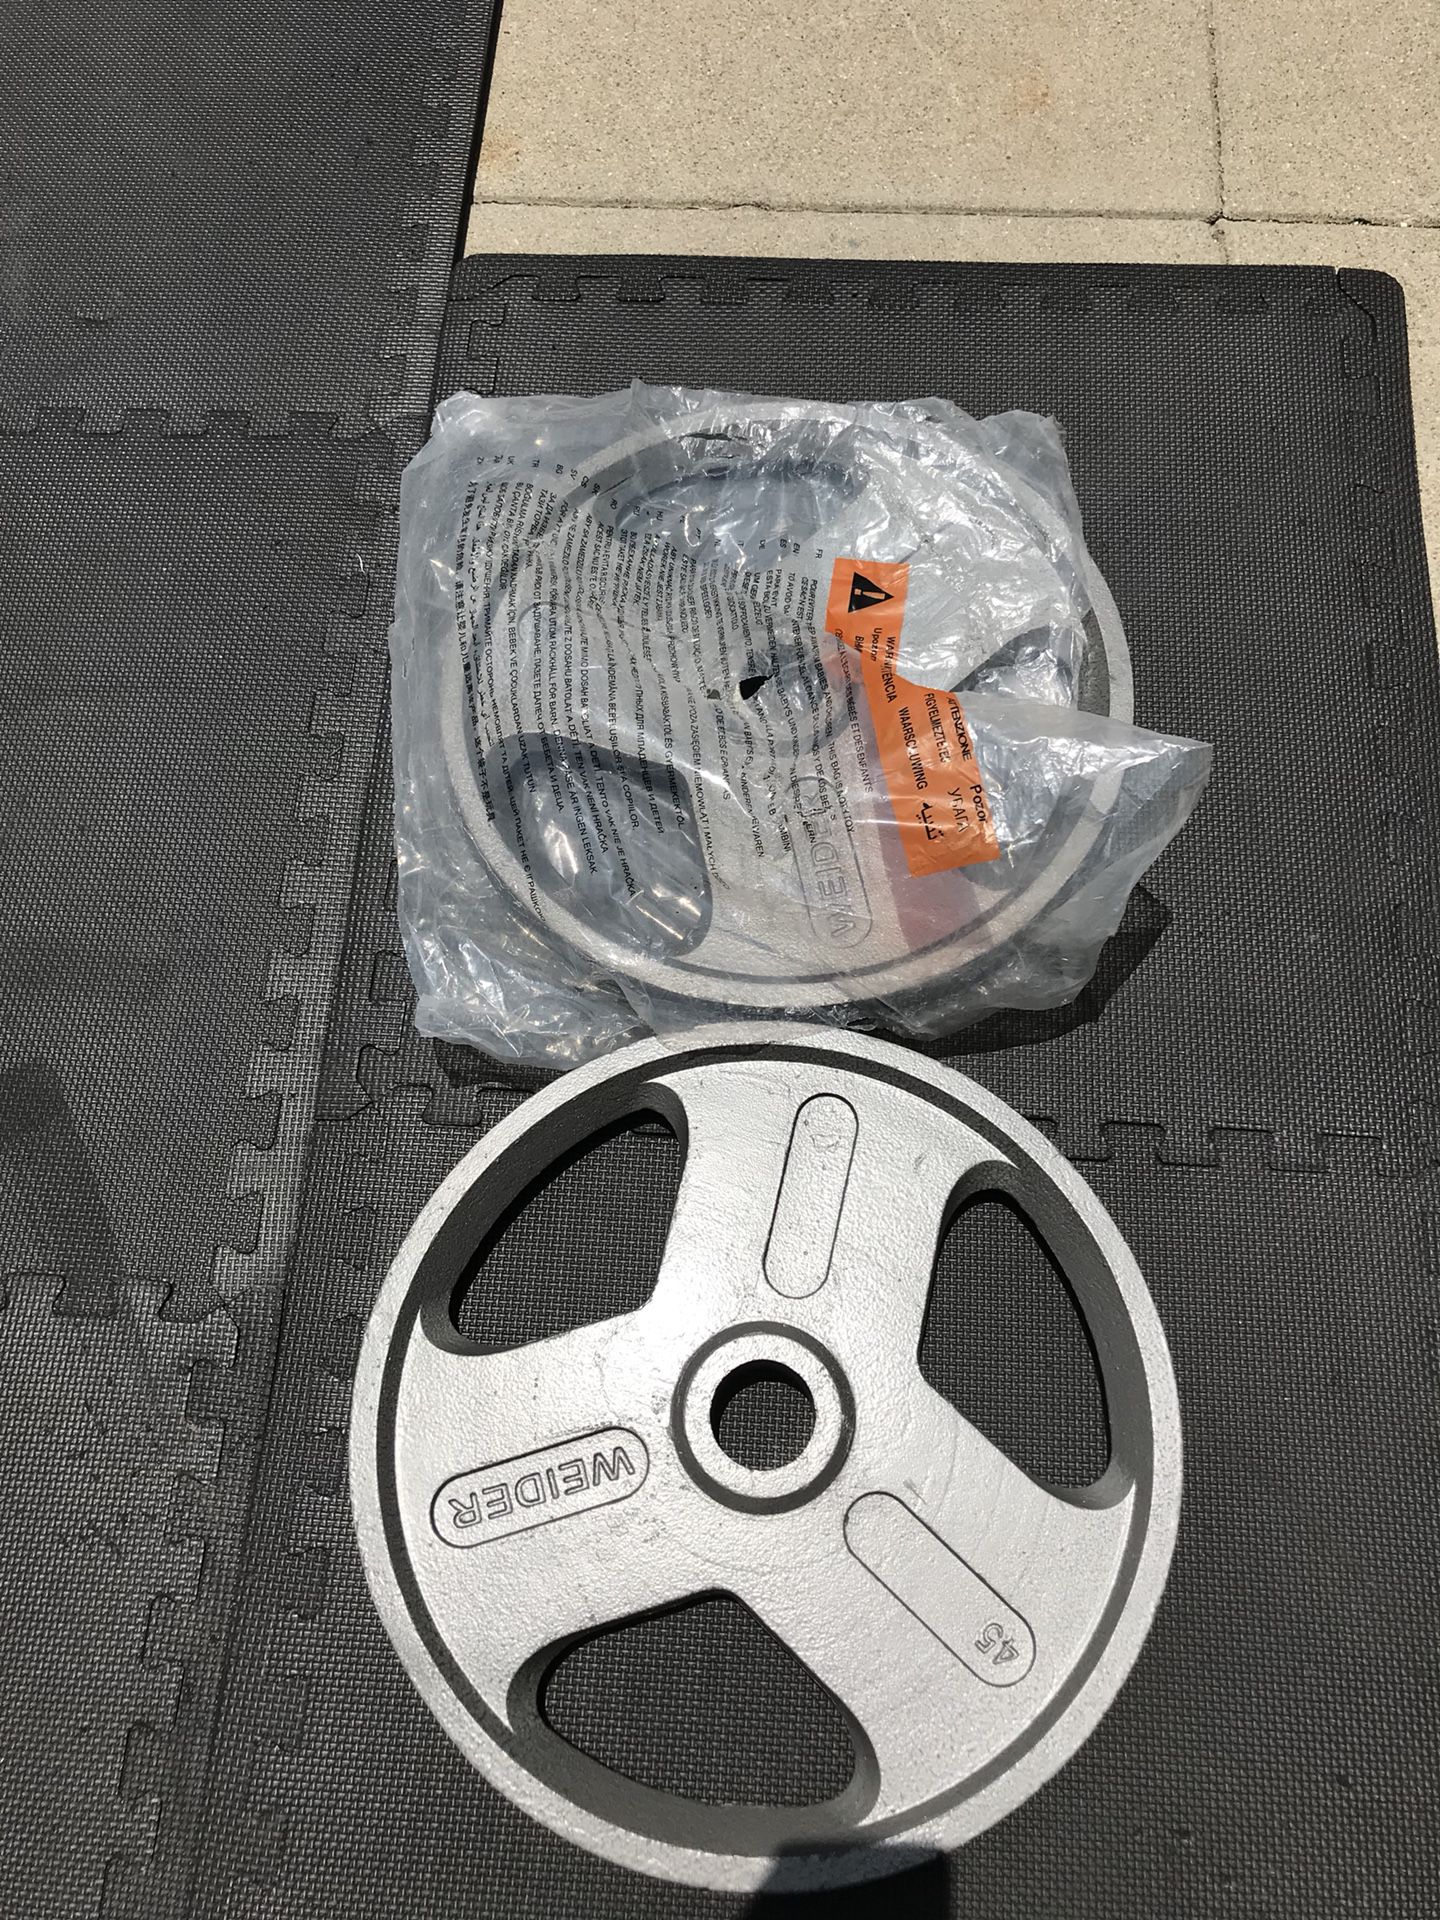 NEW Olympic weights (2x45s) For $70 Firm!!!